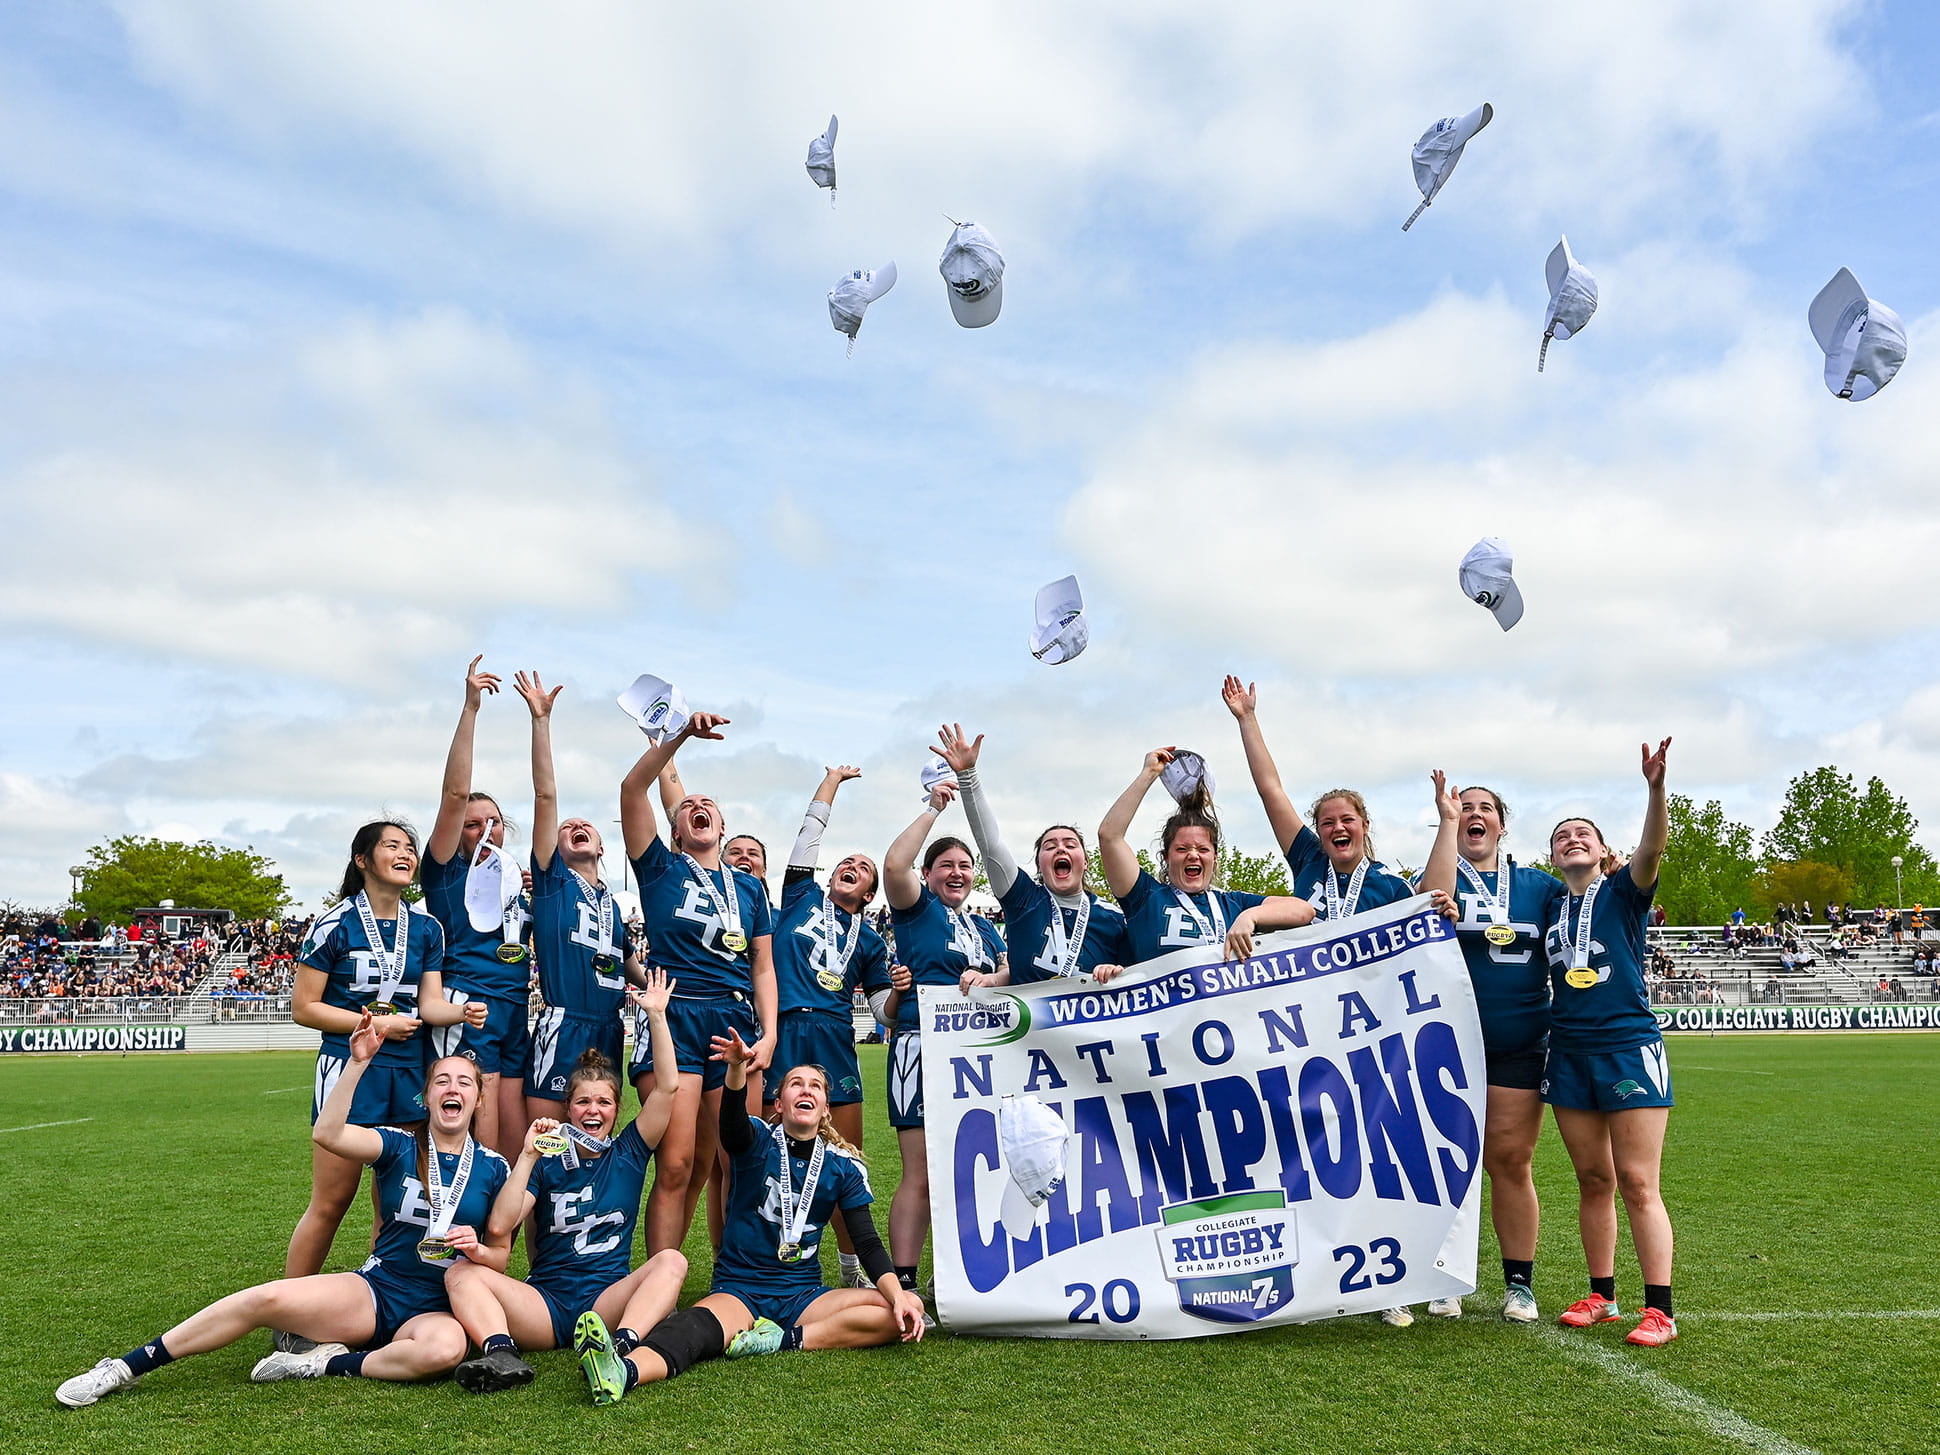 The No. 1 nationally ranked women’s rugby team